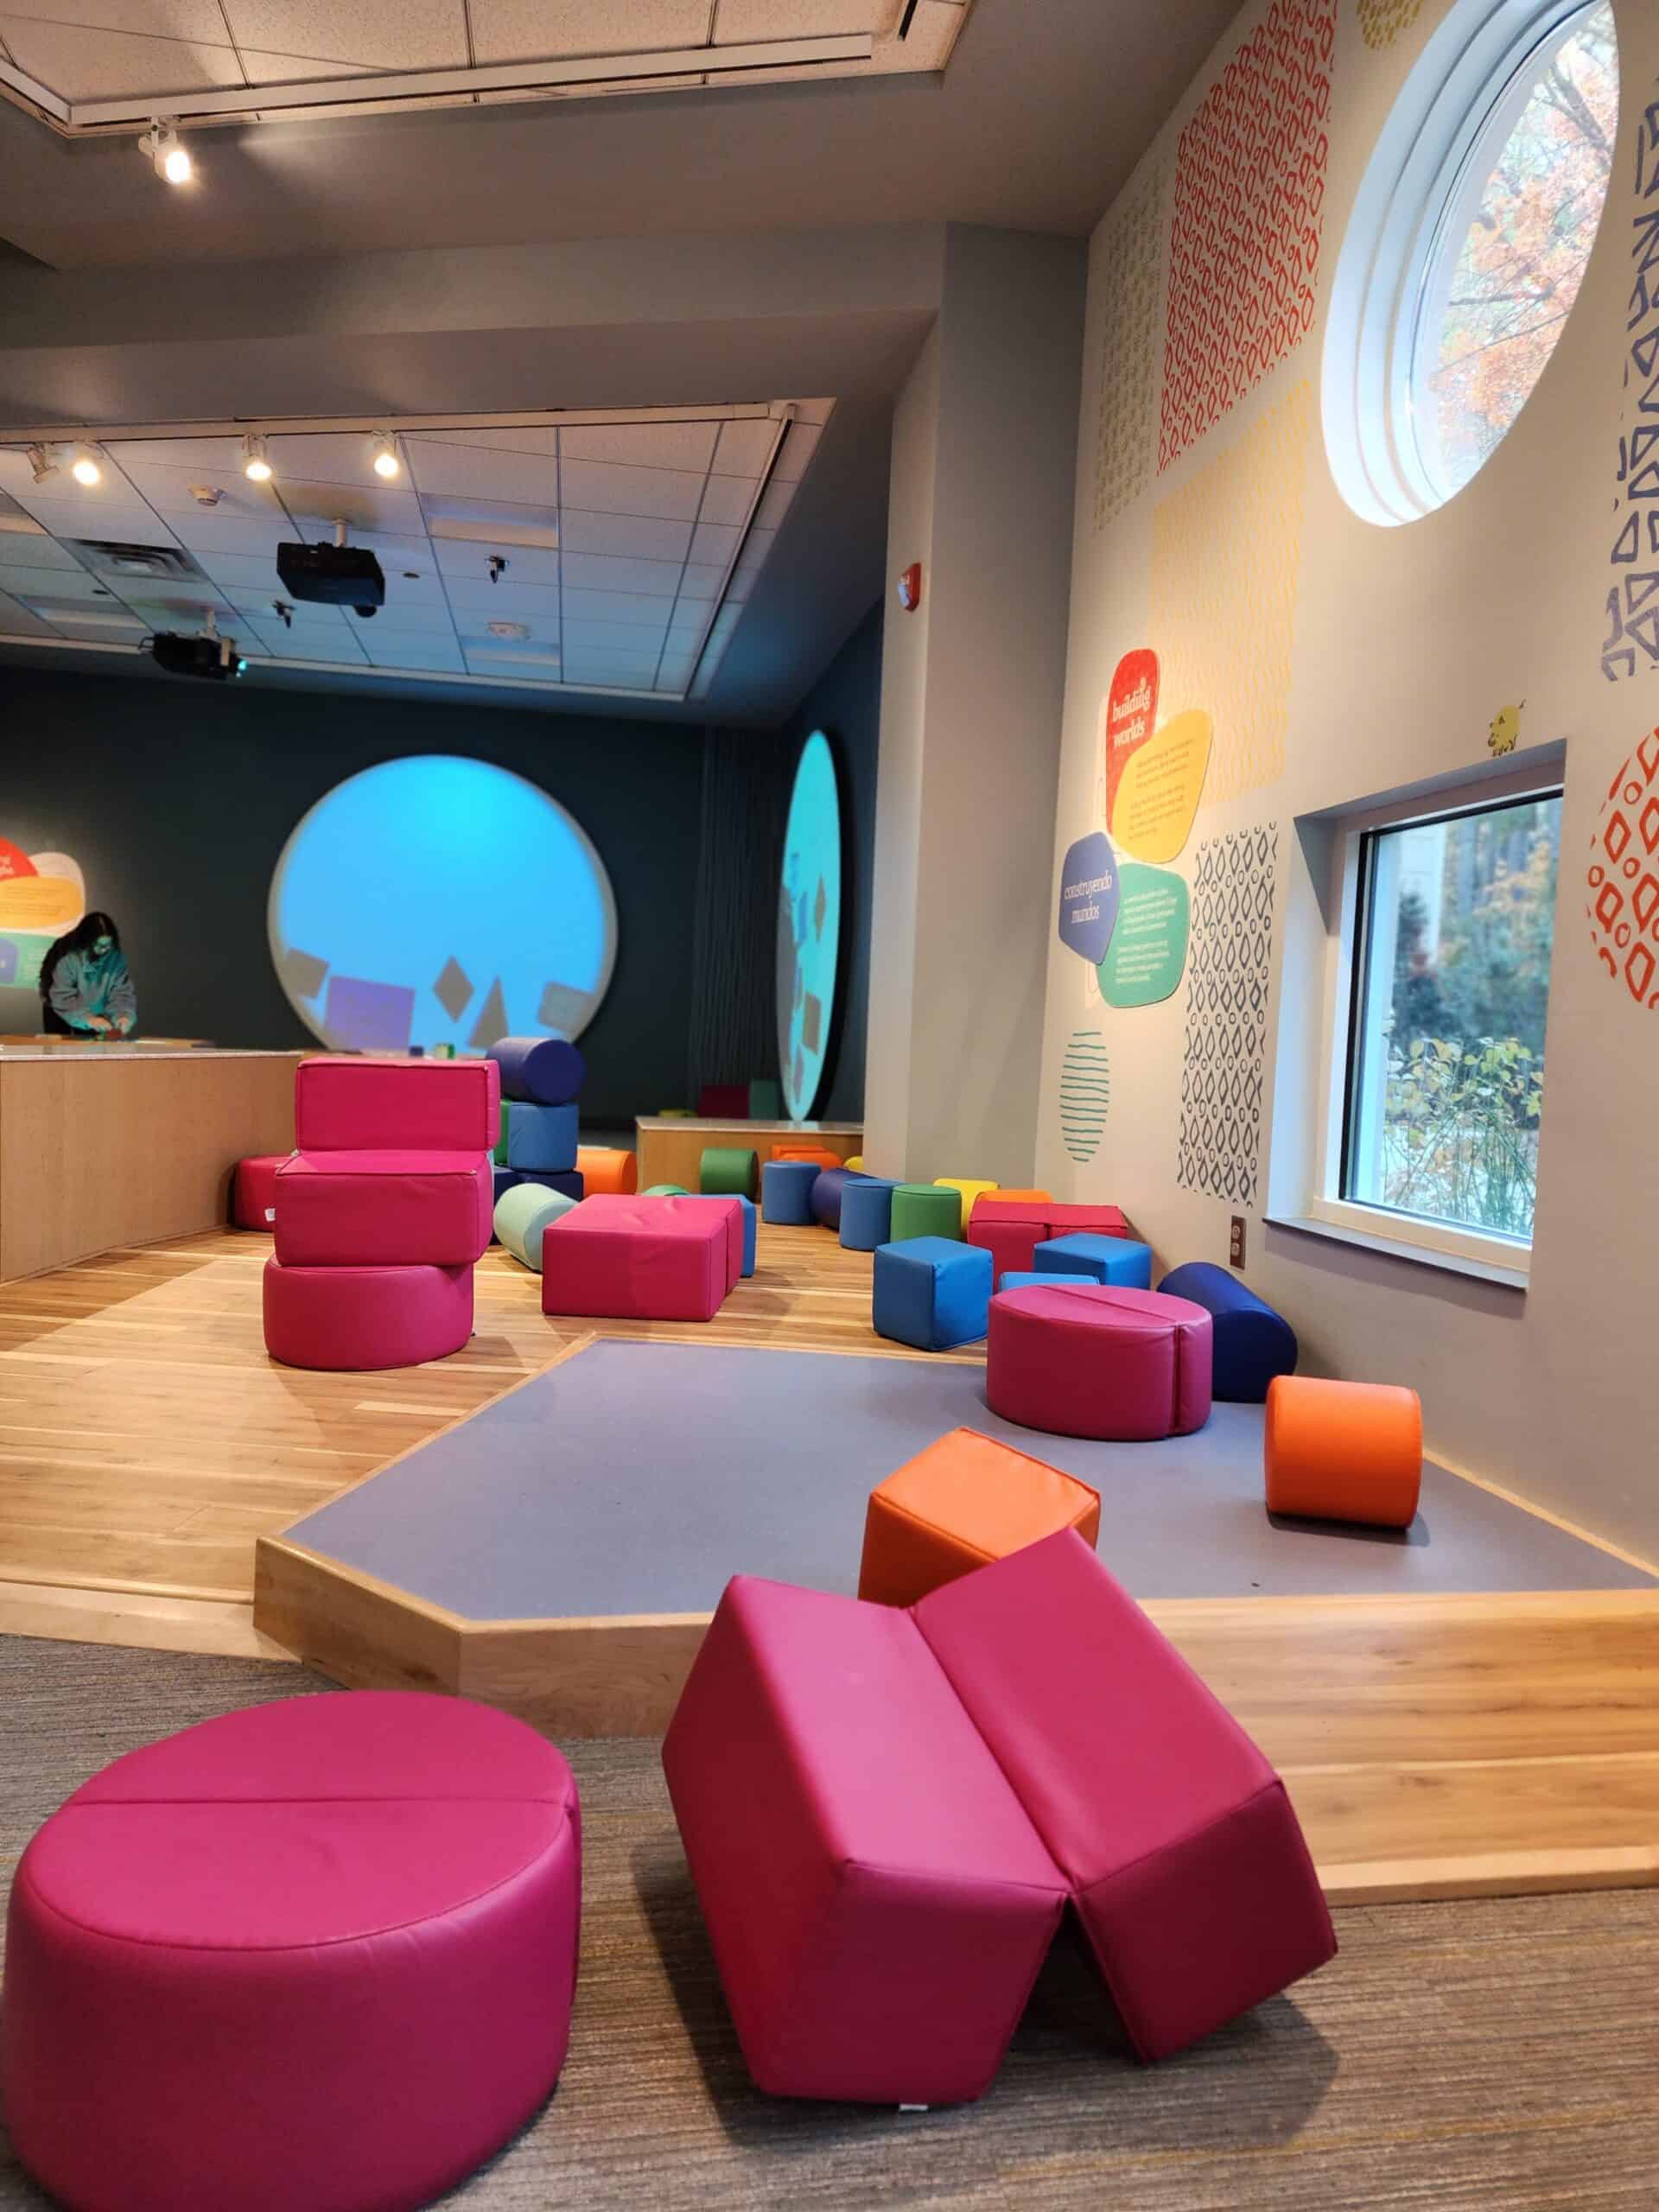 A soft play area for kids with brightly colored foam blocks on a wooden floor, large round windows providing natural light, and educational wall art, creating a safe and inviting space for imaginative play and motor skill development.